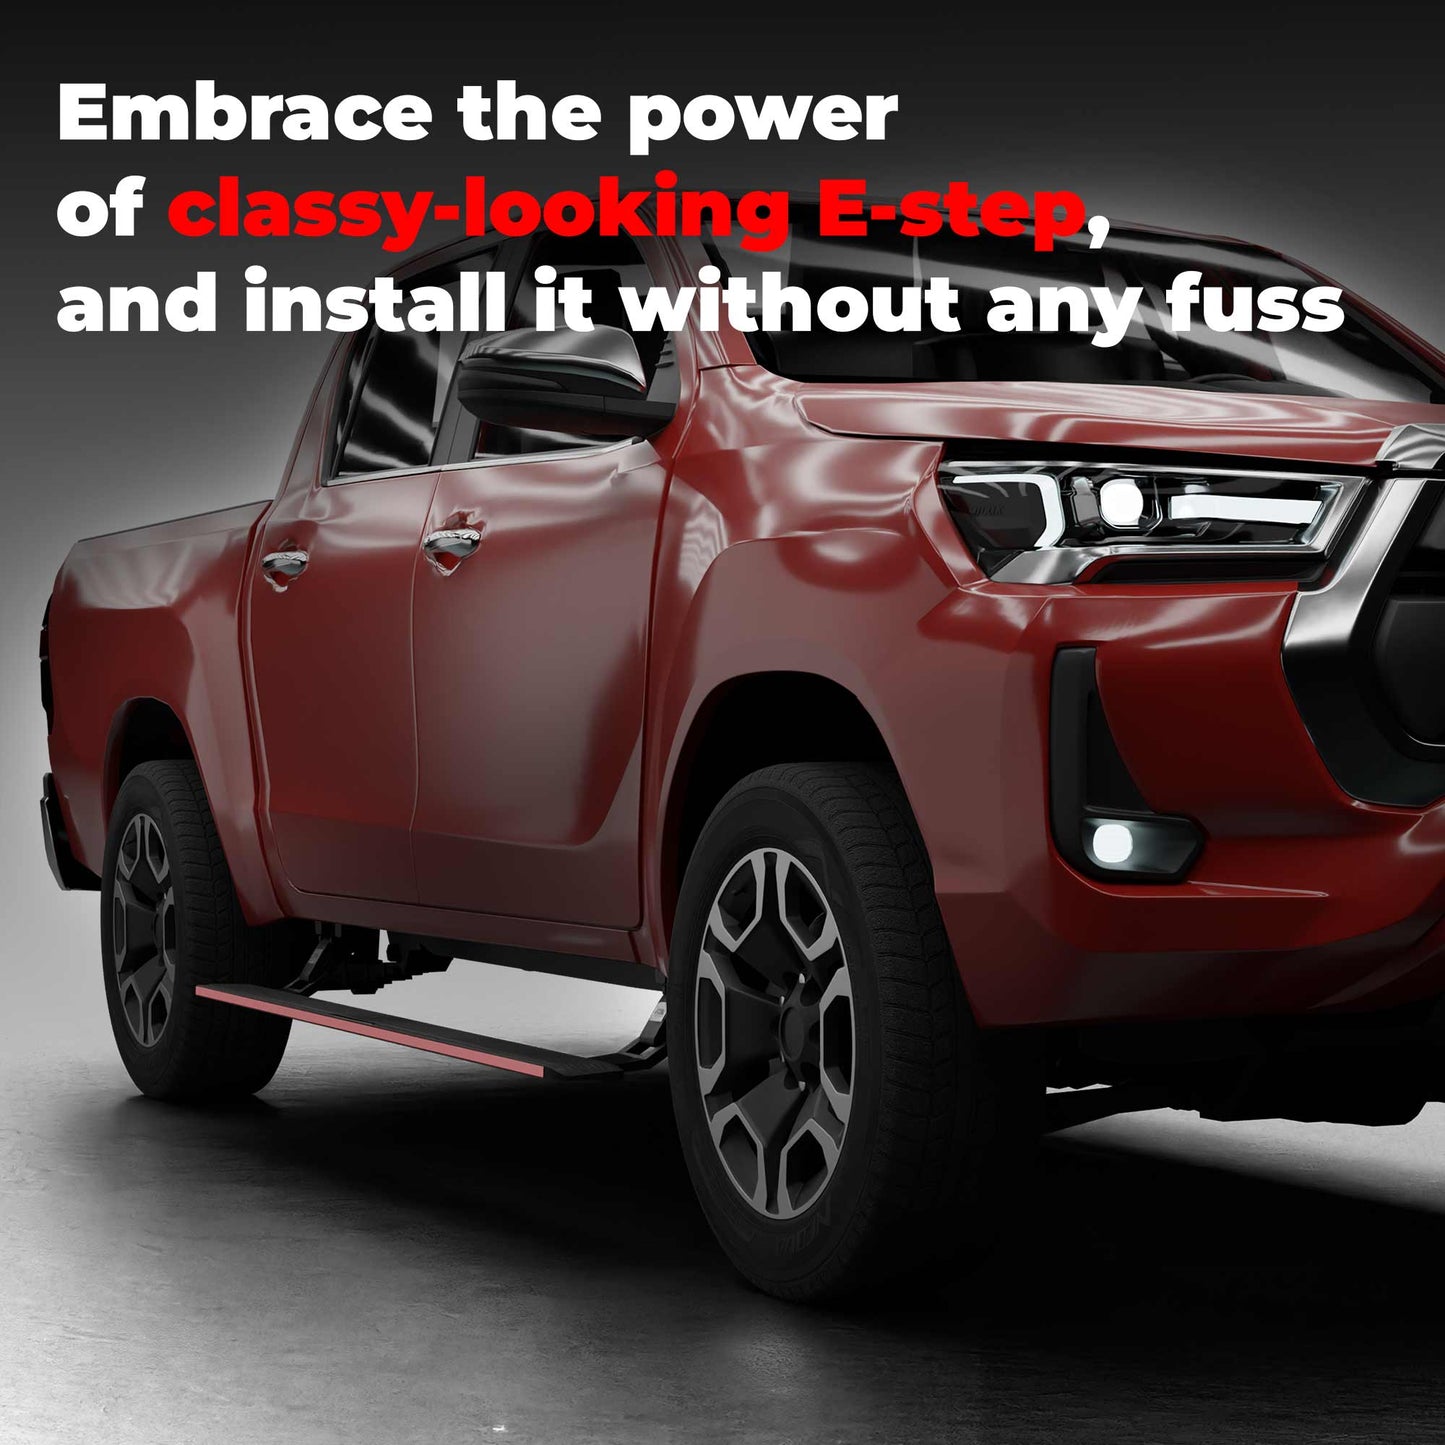 JCBL Accessories Automatic Door Side E-Step for SUVs ( Toyota Hilux Revo 16+ E-Side Step ) | Embrace the power  of classy-looking E-stey  and instalLit without any.fuss